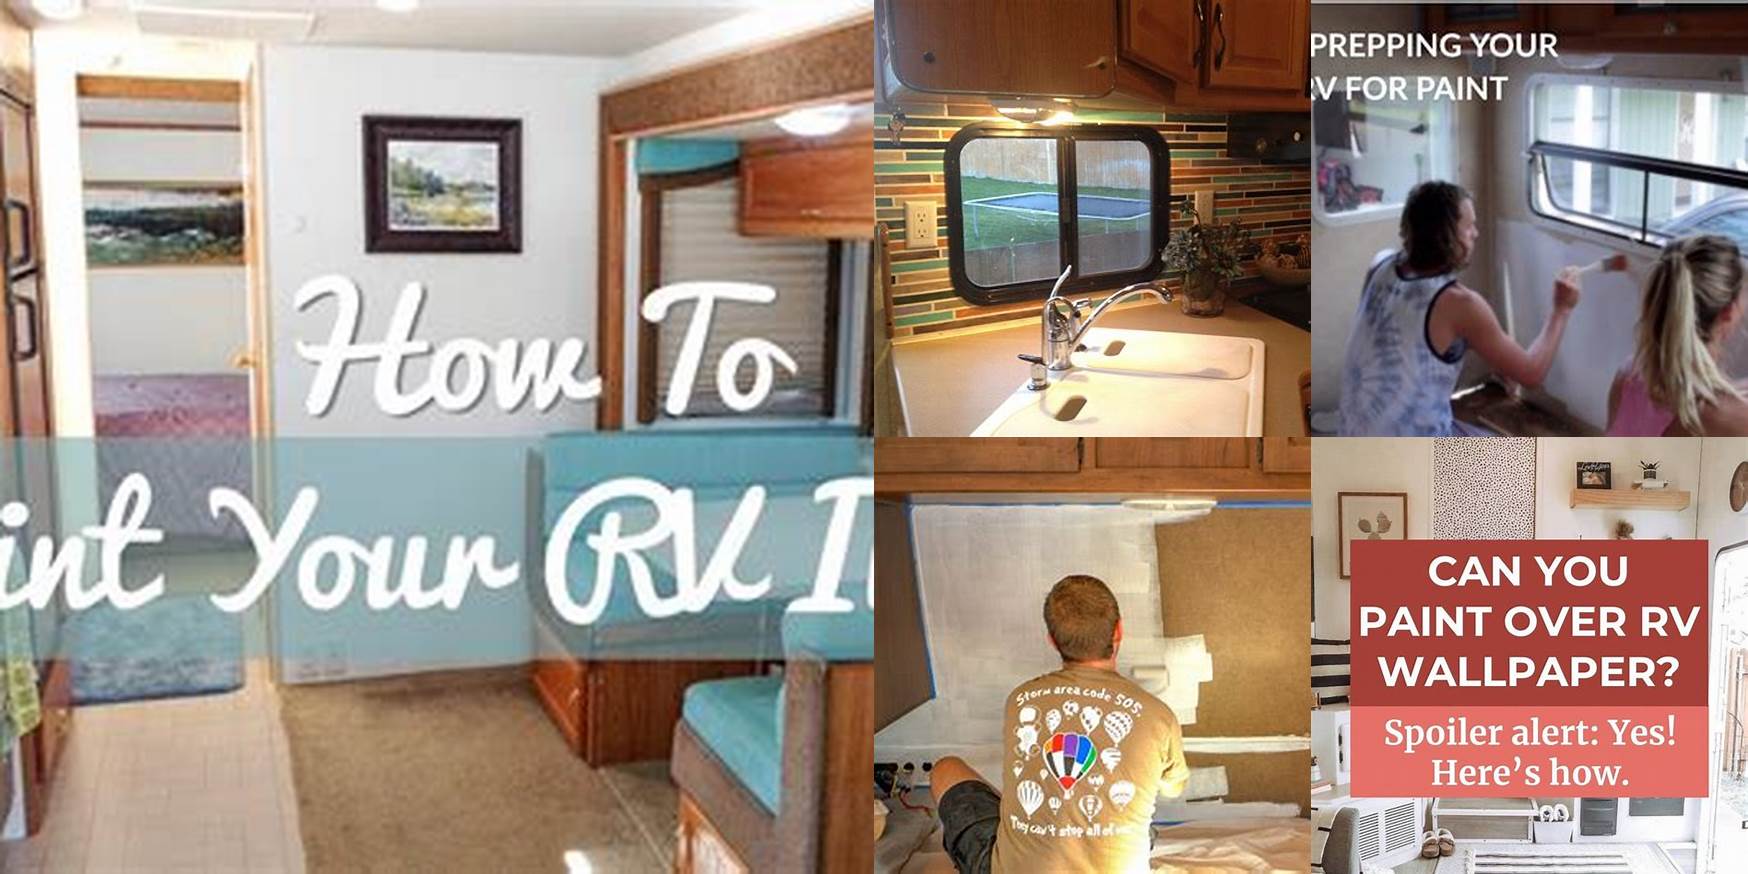 Can You Paint Over Rv Wallpaper